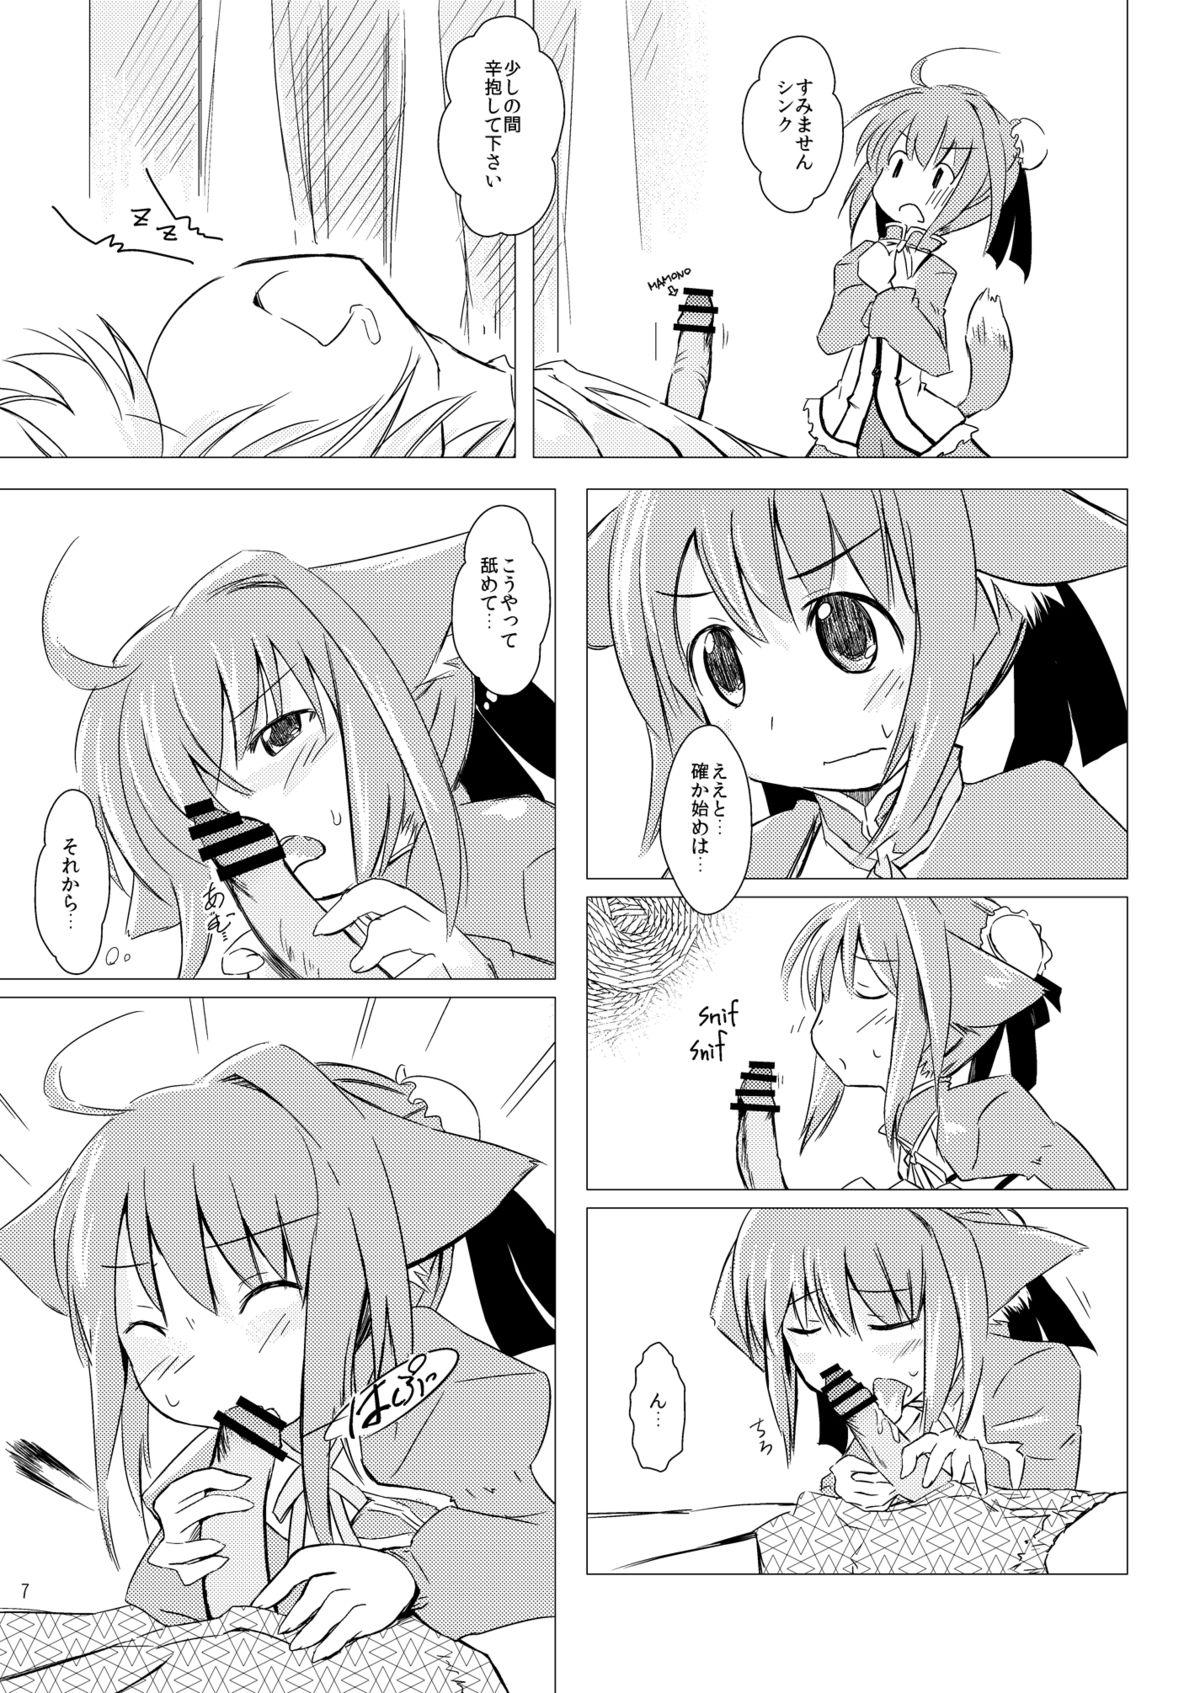 Play Millhi no Asa no Undou - Millhiore's Morning Business - Dog days Cocks - Page 7